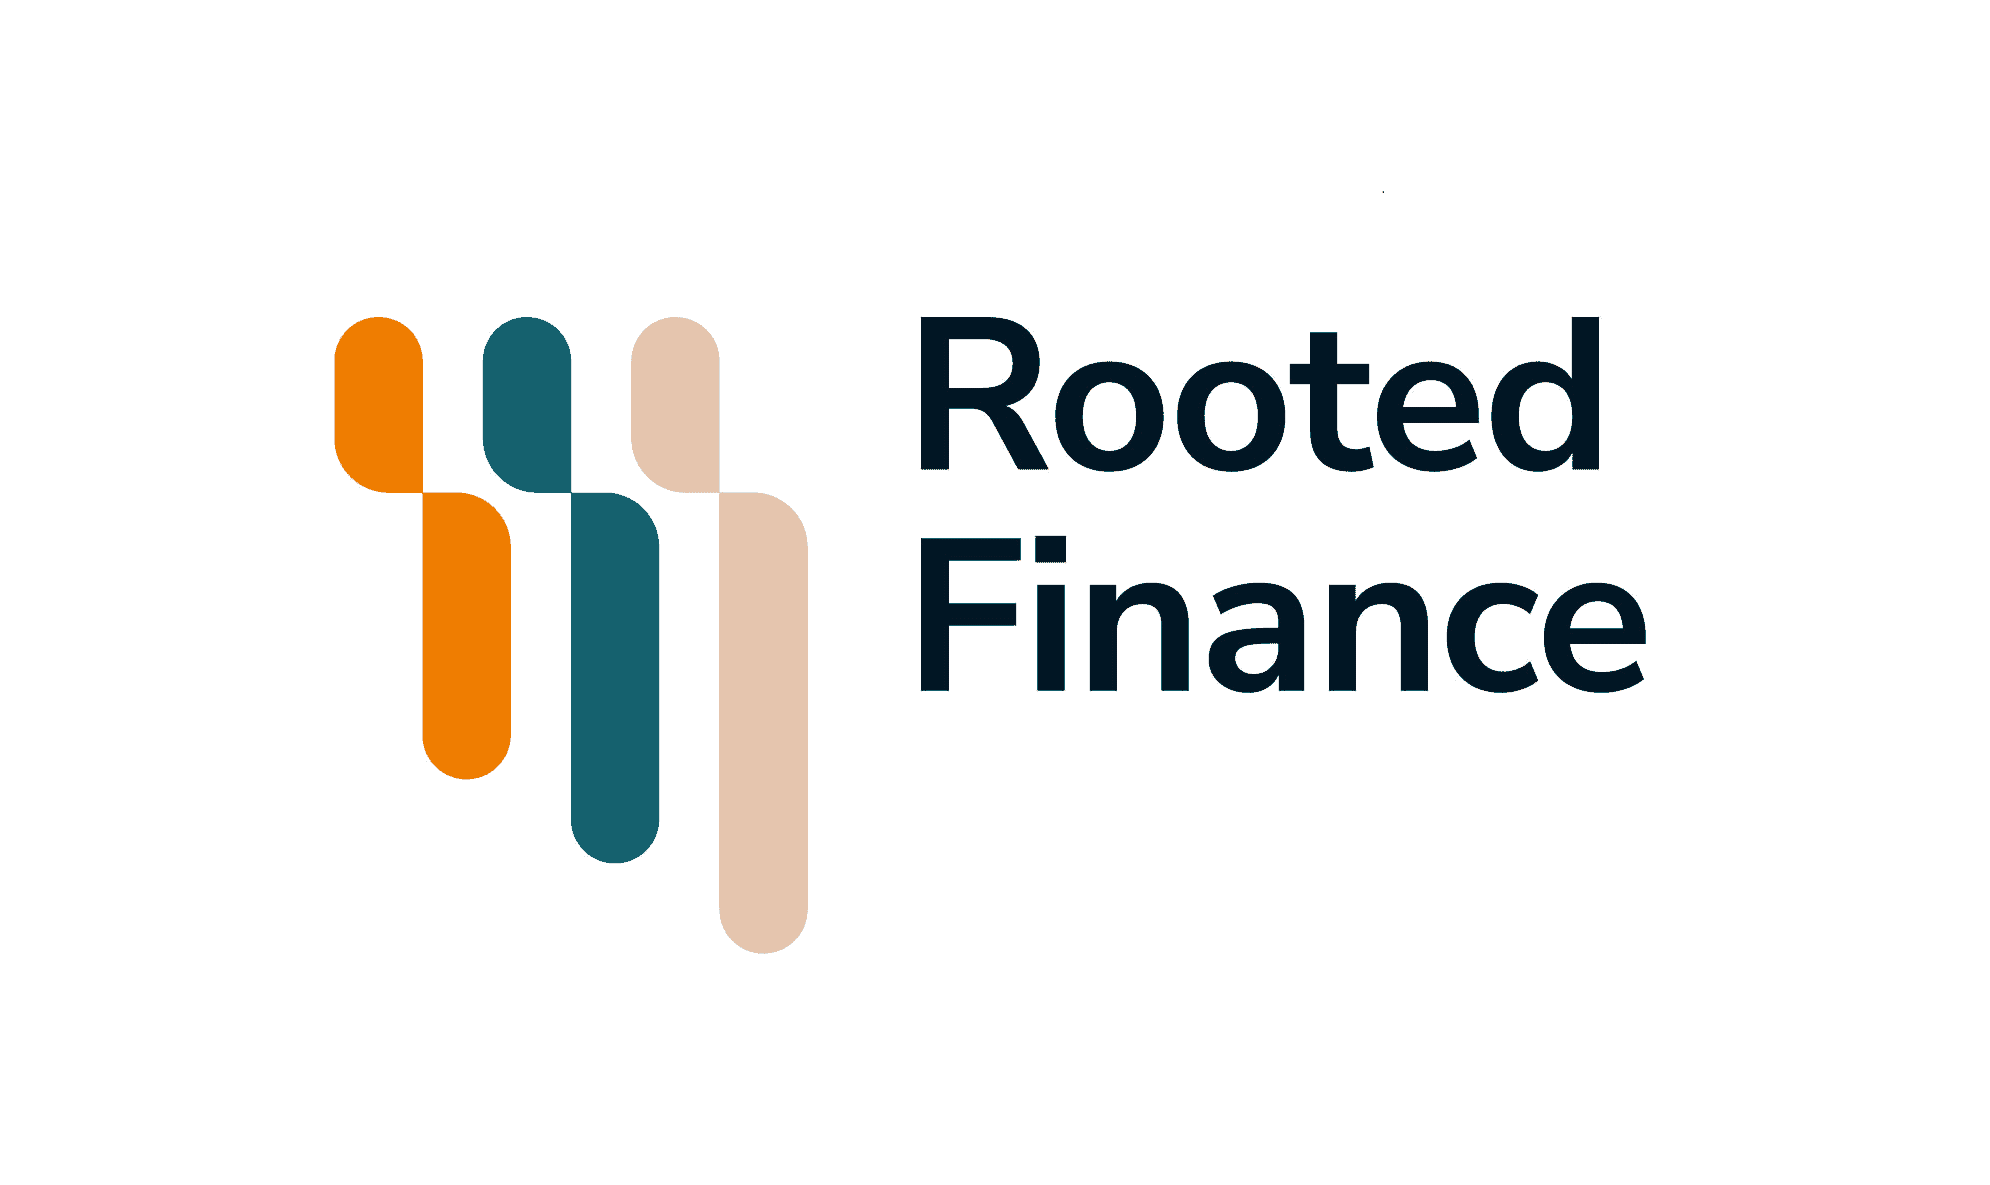 Rooted Finance